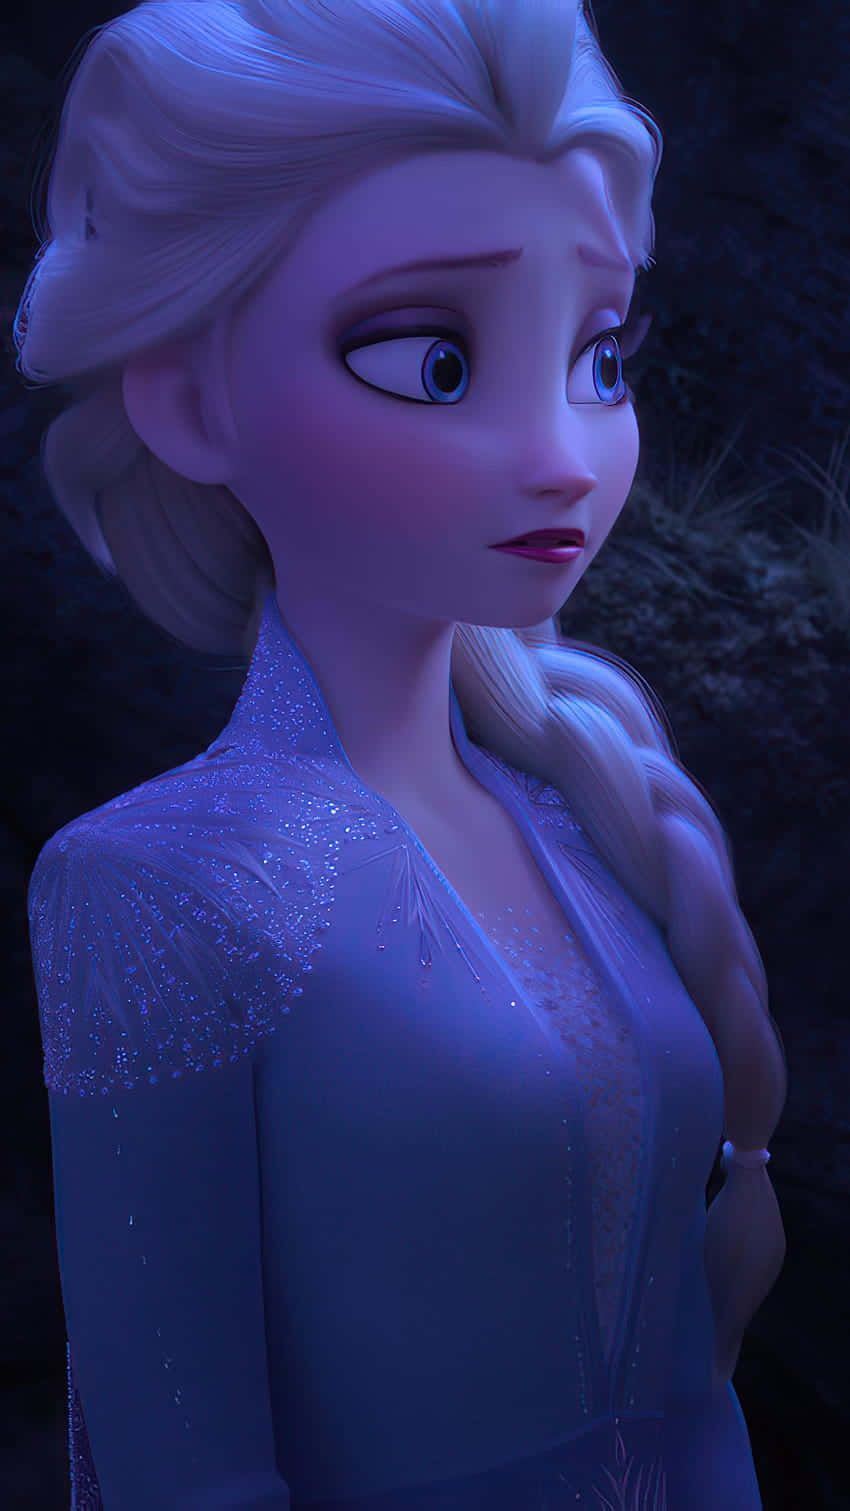 Download Stay connected in style with the Elsa Phone. Wallpaper